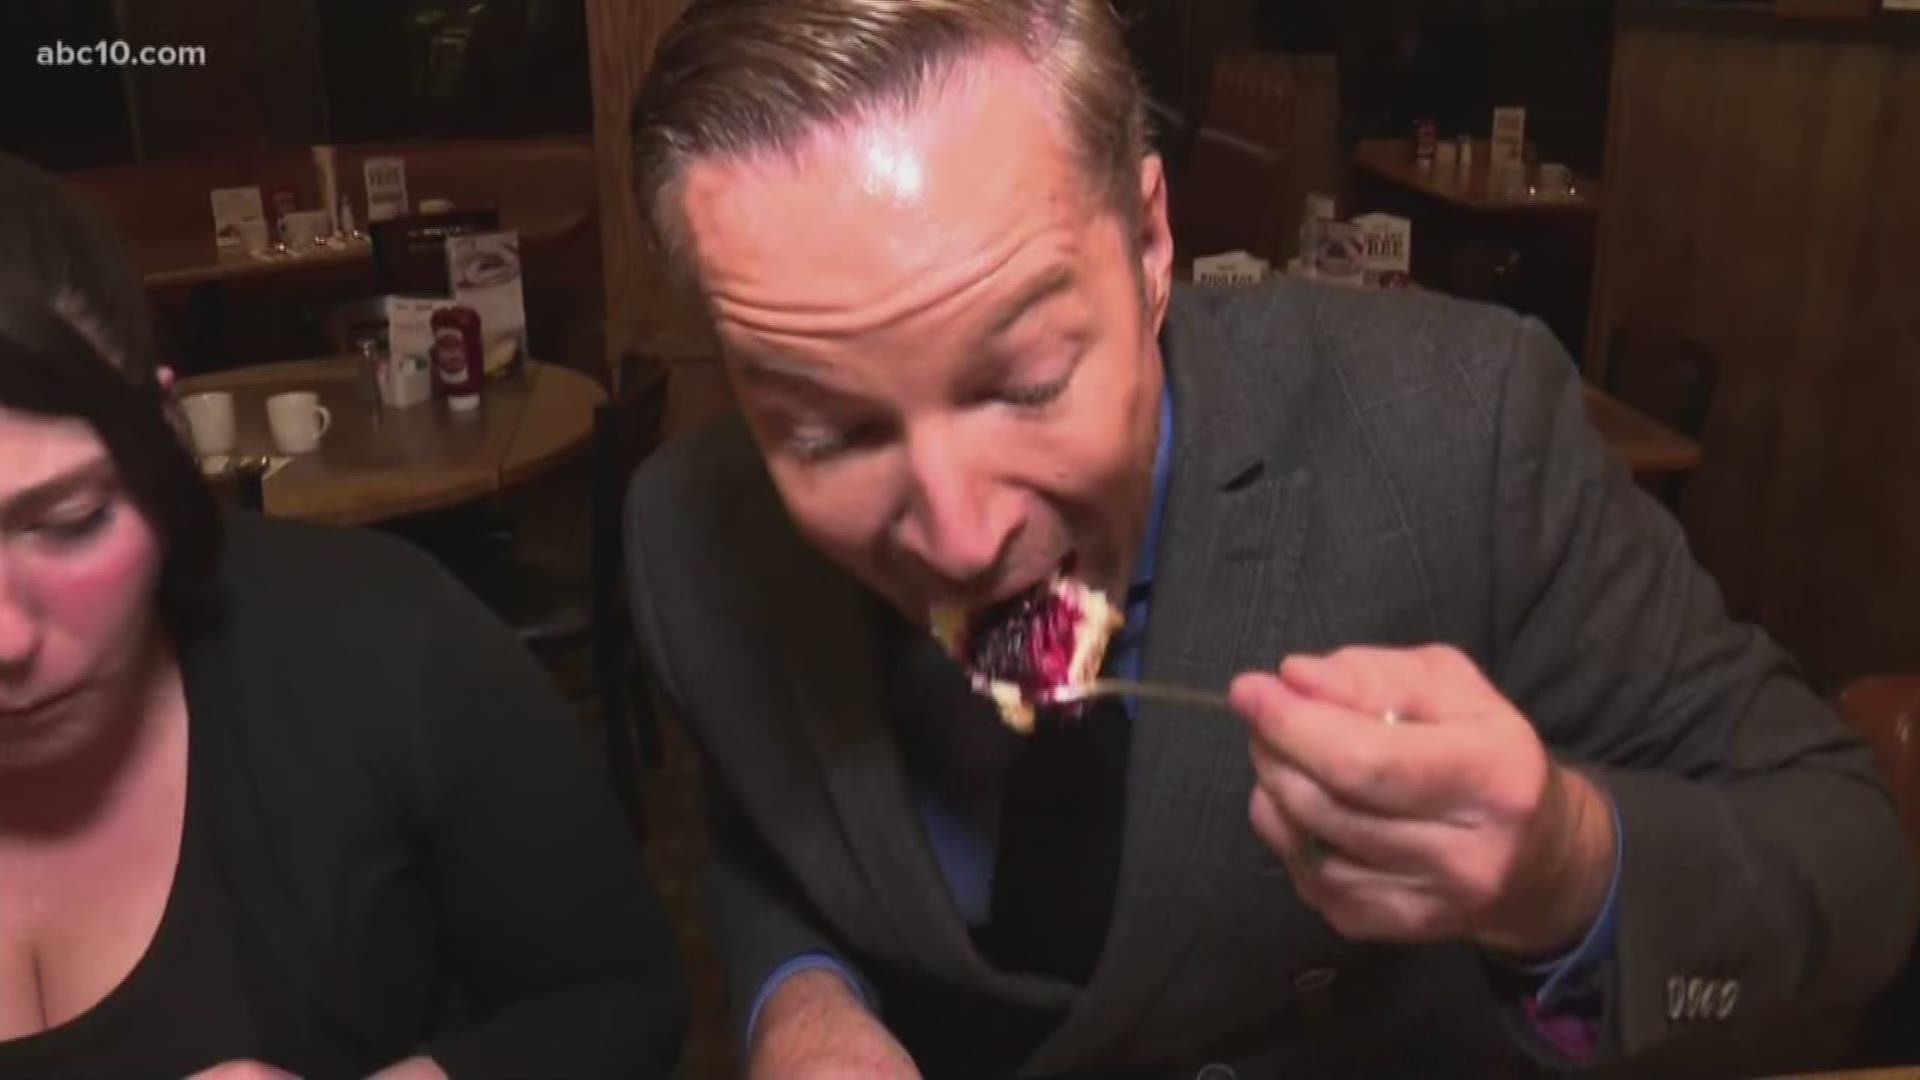 Mark S. Allen went to Sacramento's Shari's Cafe & Pies in the Pocket for National Pie Day. And, yes, he did compete in (and won) a pie eating contest.